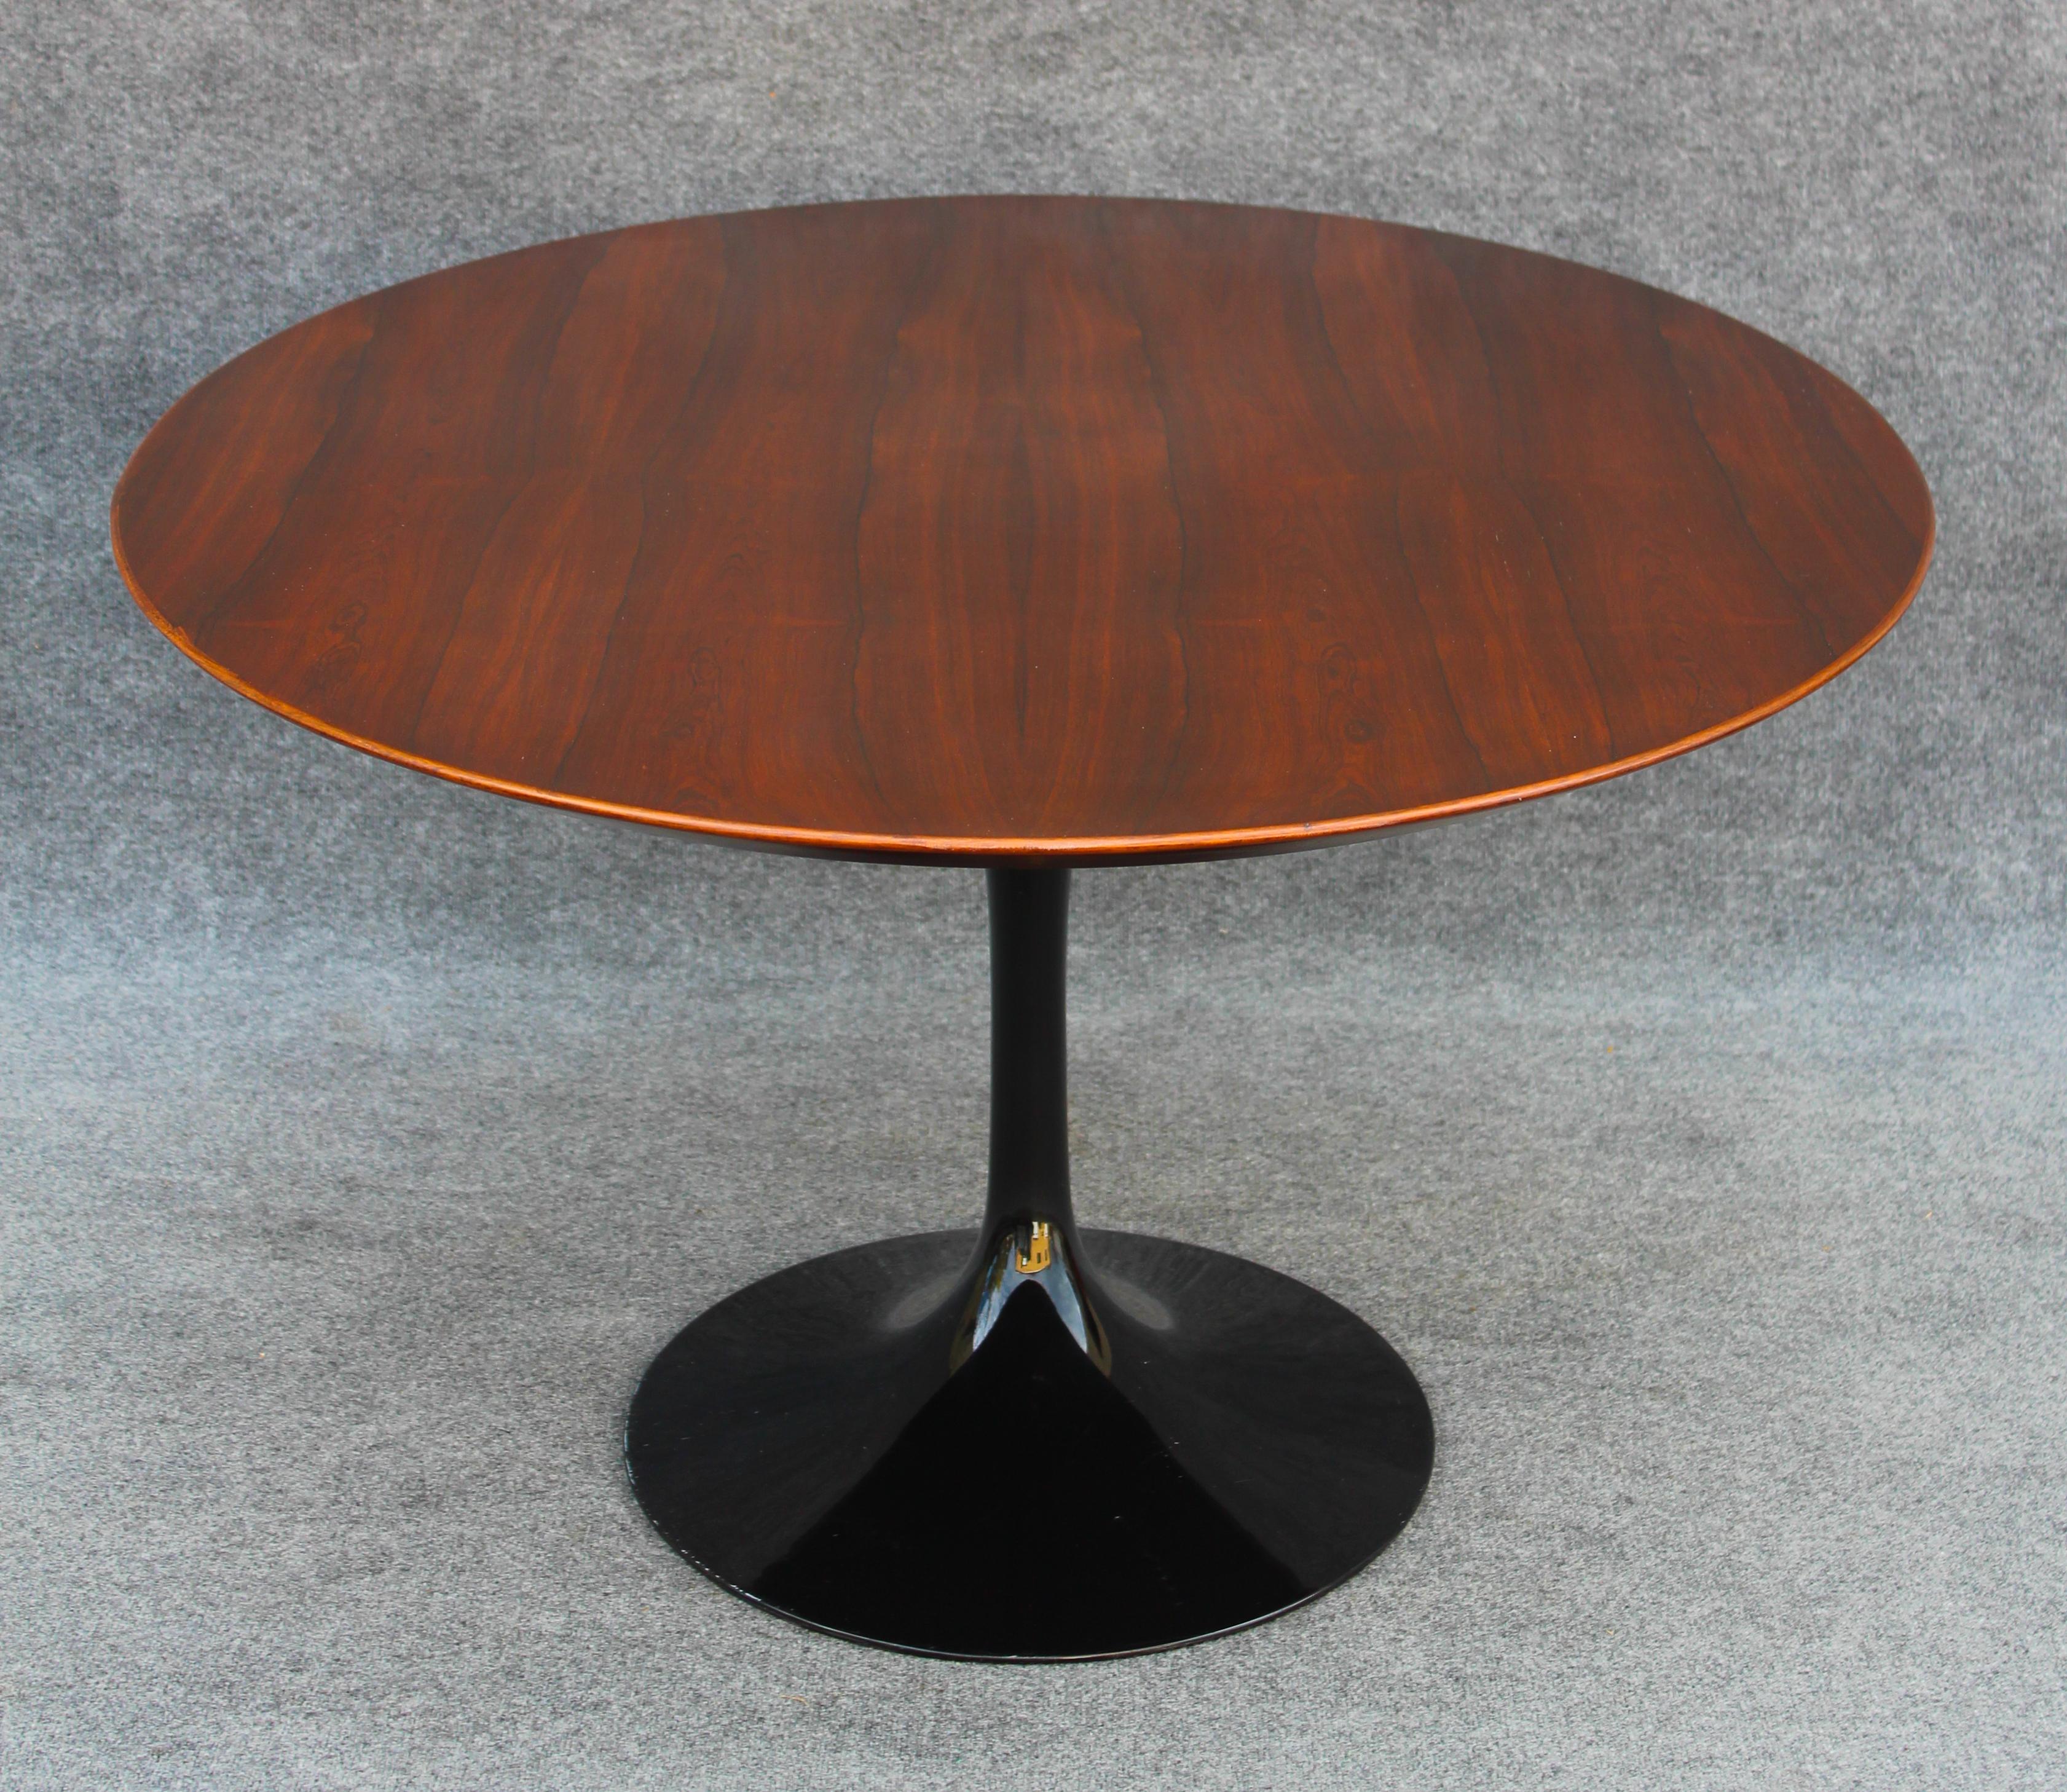 Lacquered Professionally Restored Eero Saarinen for Knoll Rare Rosewood Tulip Dining Table